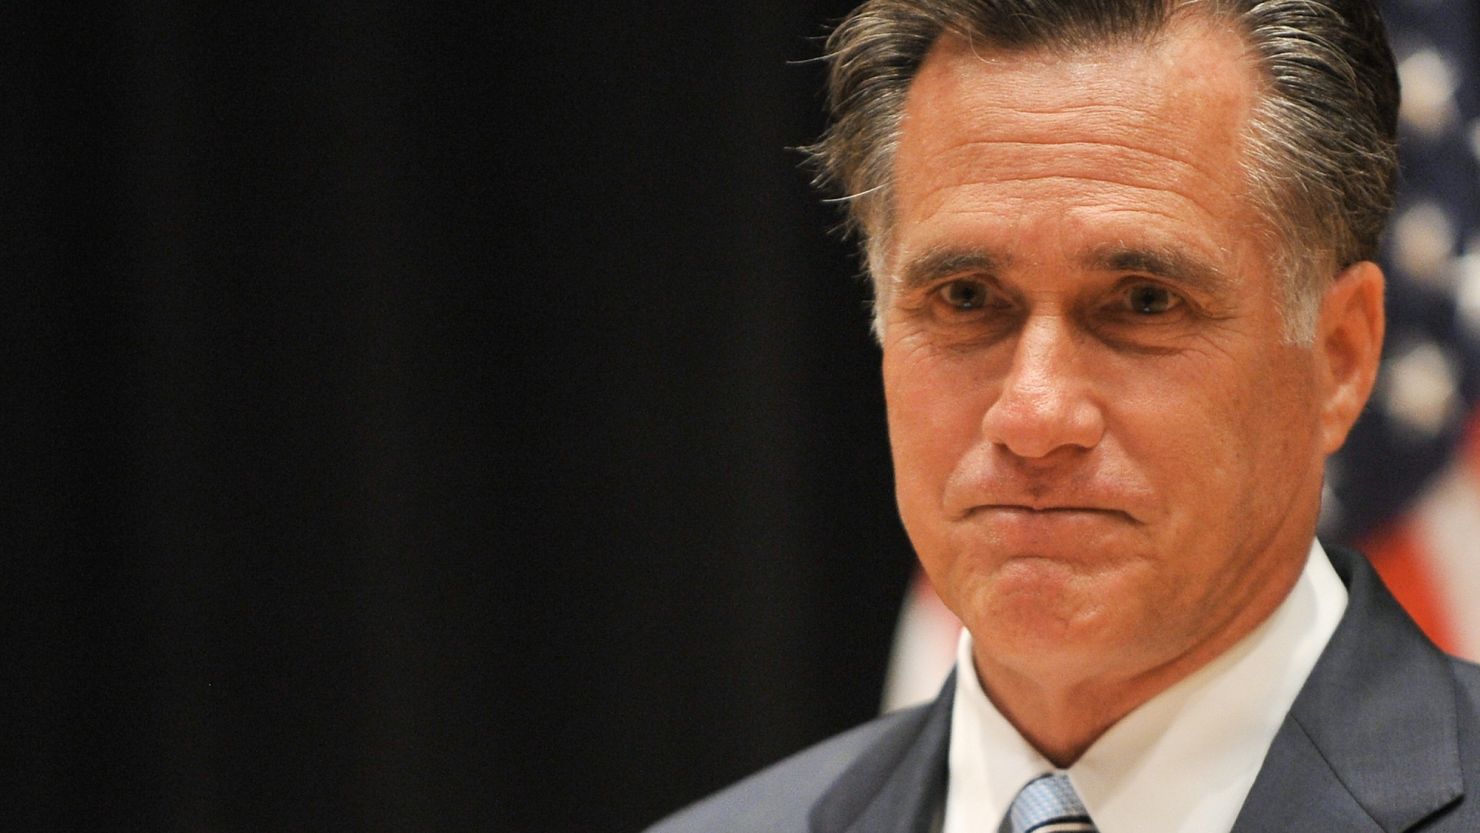 GOP challenger Mitt Romney appears to be slipping behind in some key battleground states, according to a series of new polls.